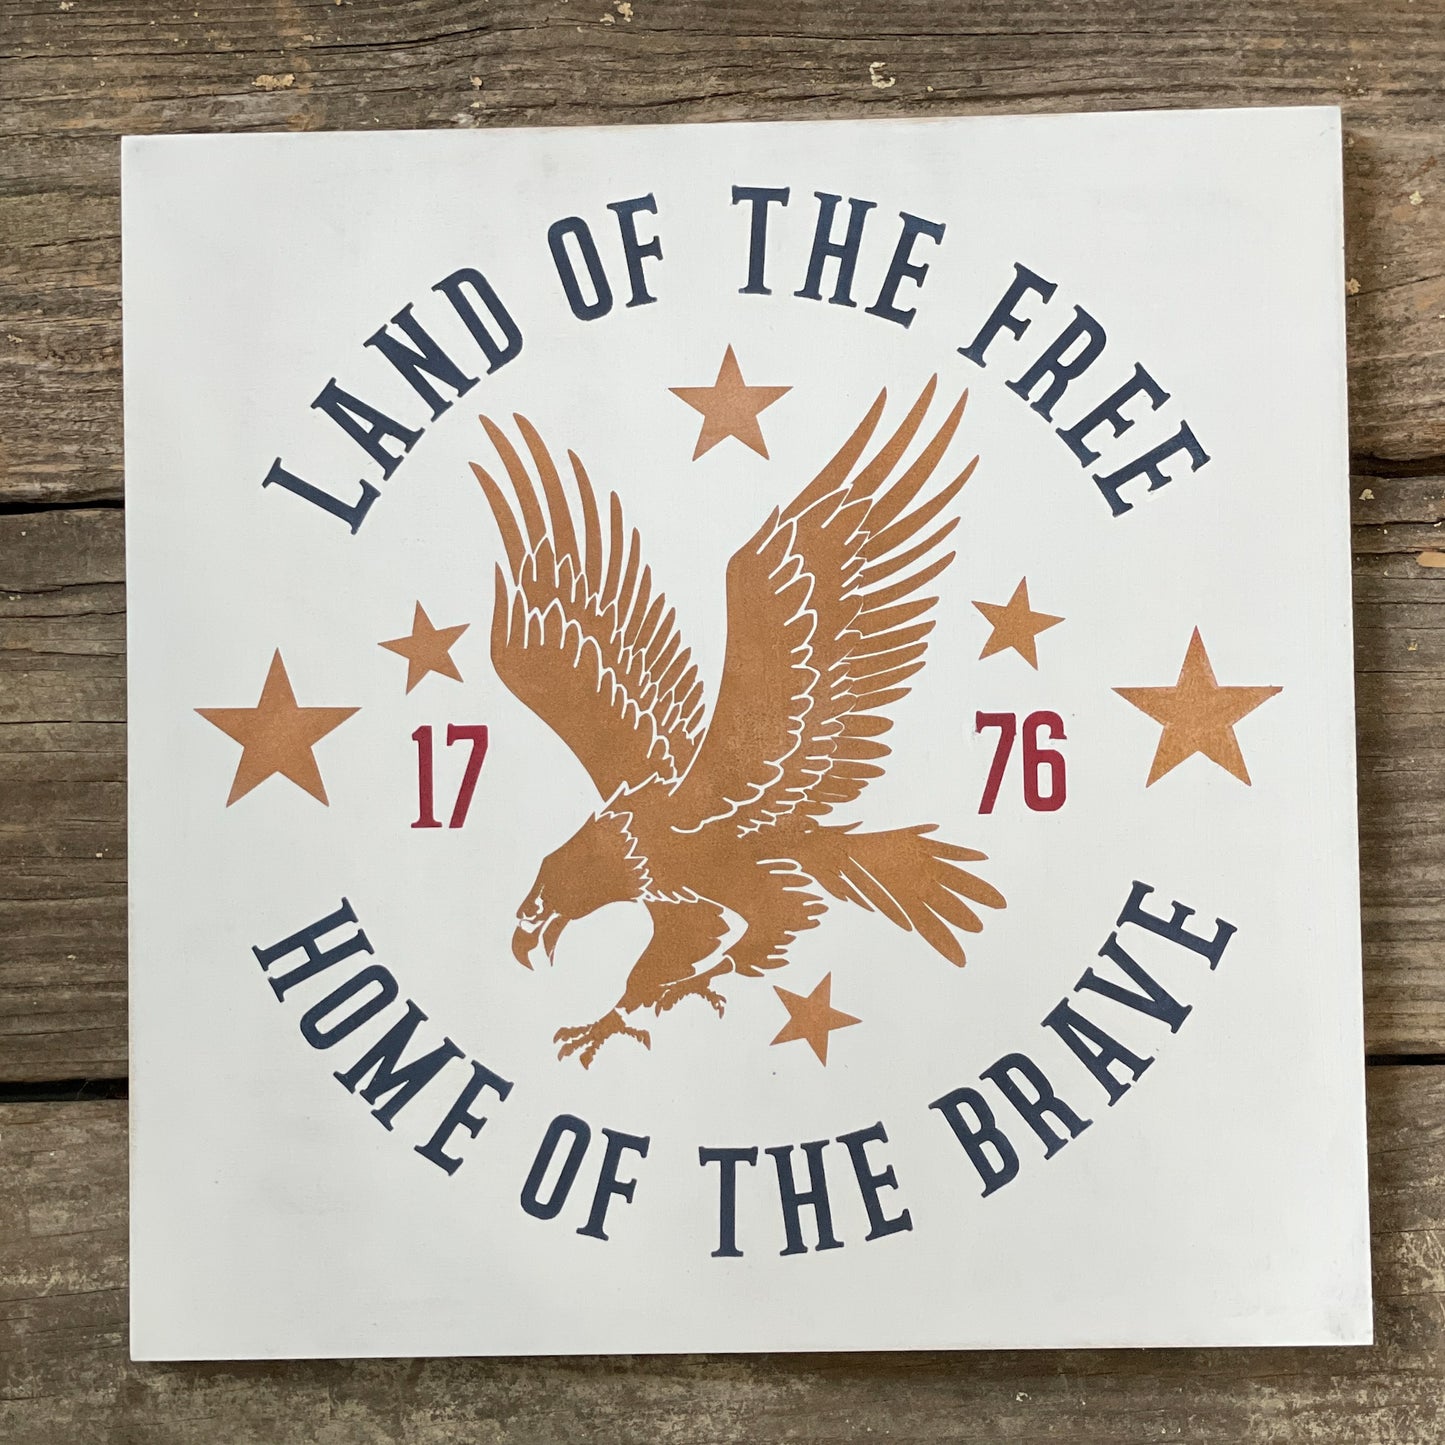 Land of the Free Home of the Brave Eagle Square Design P1420